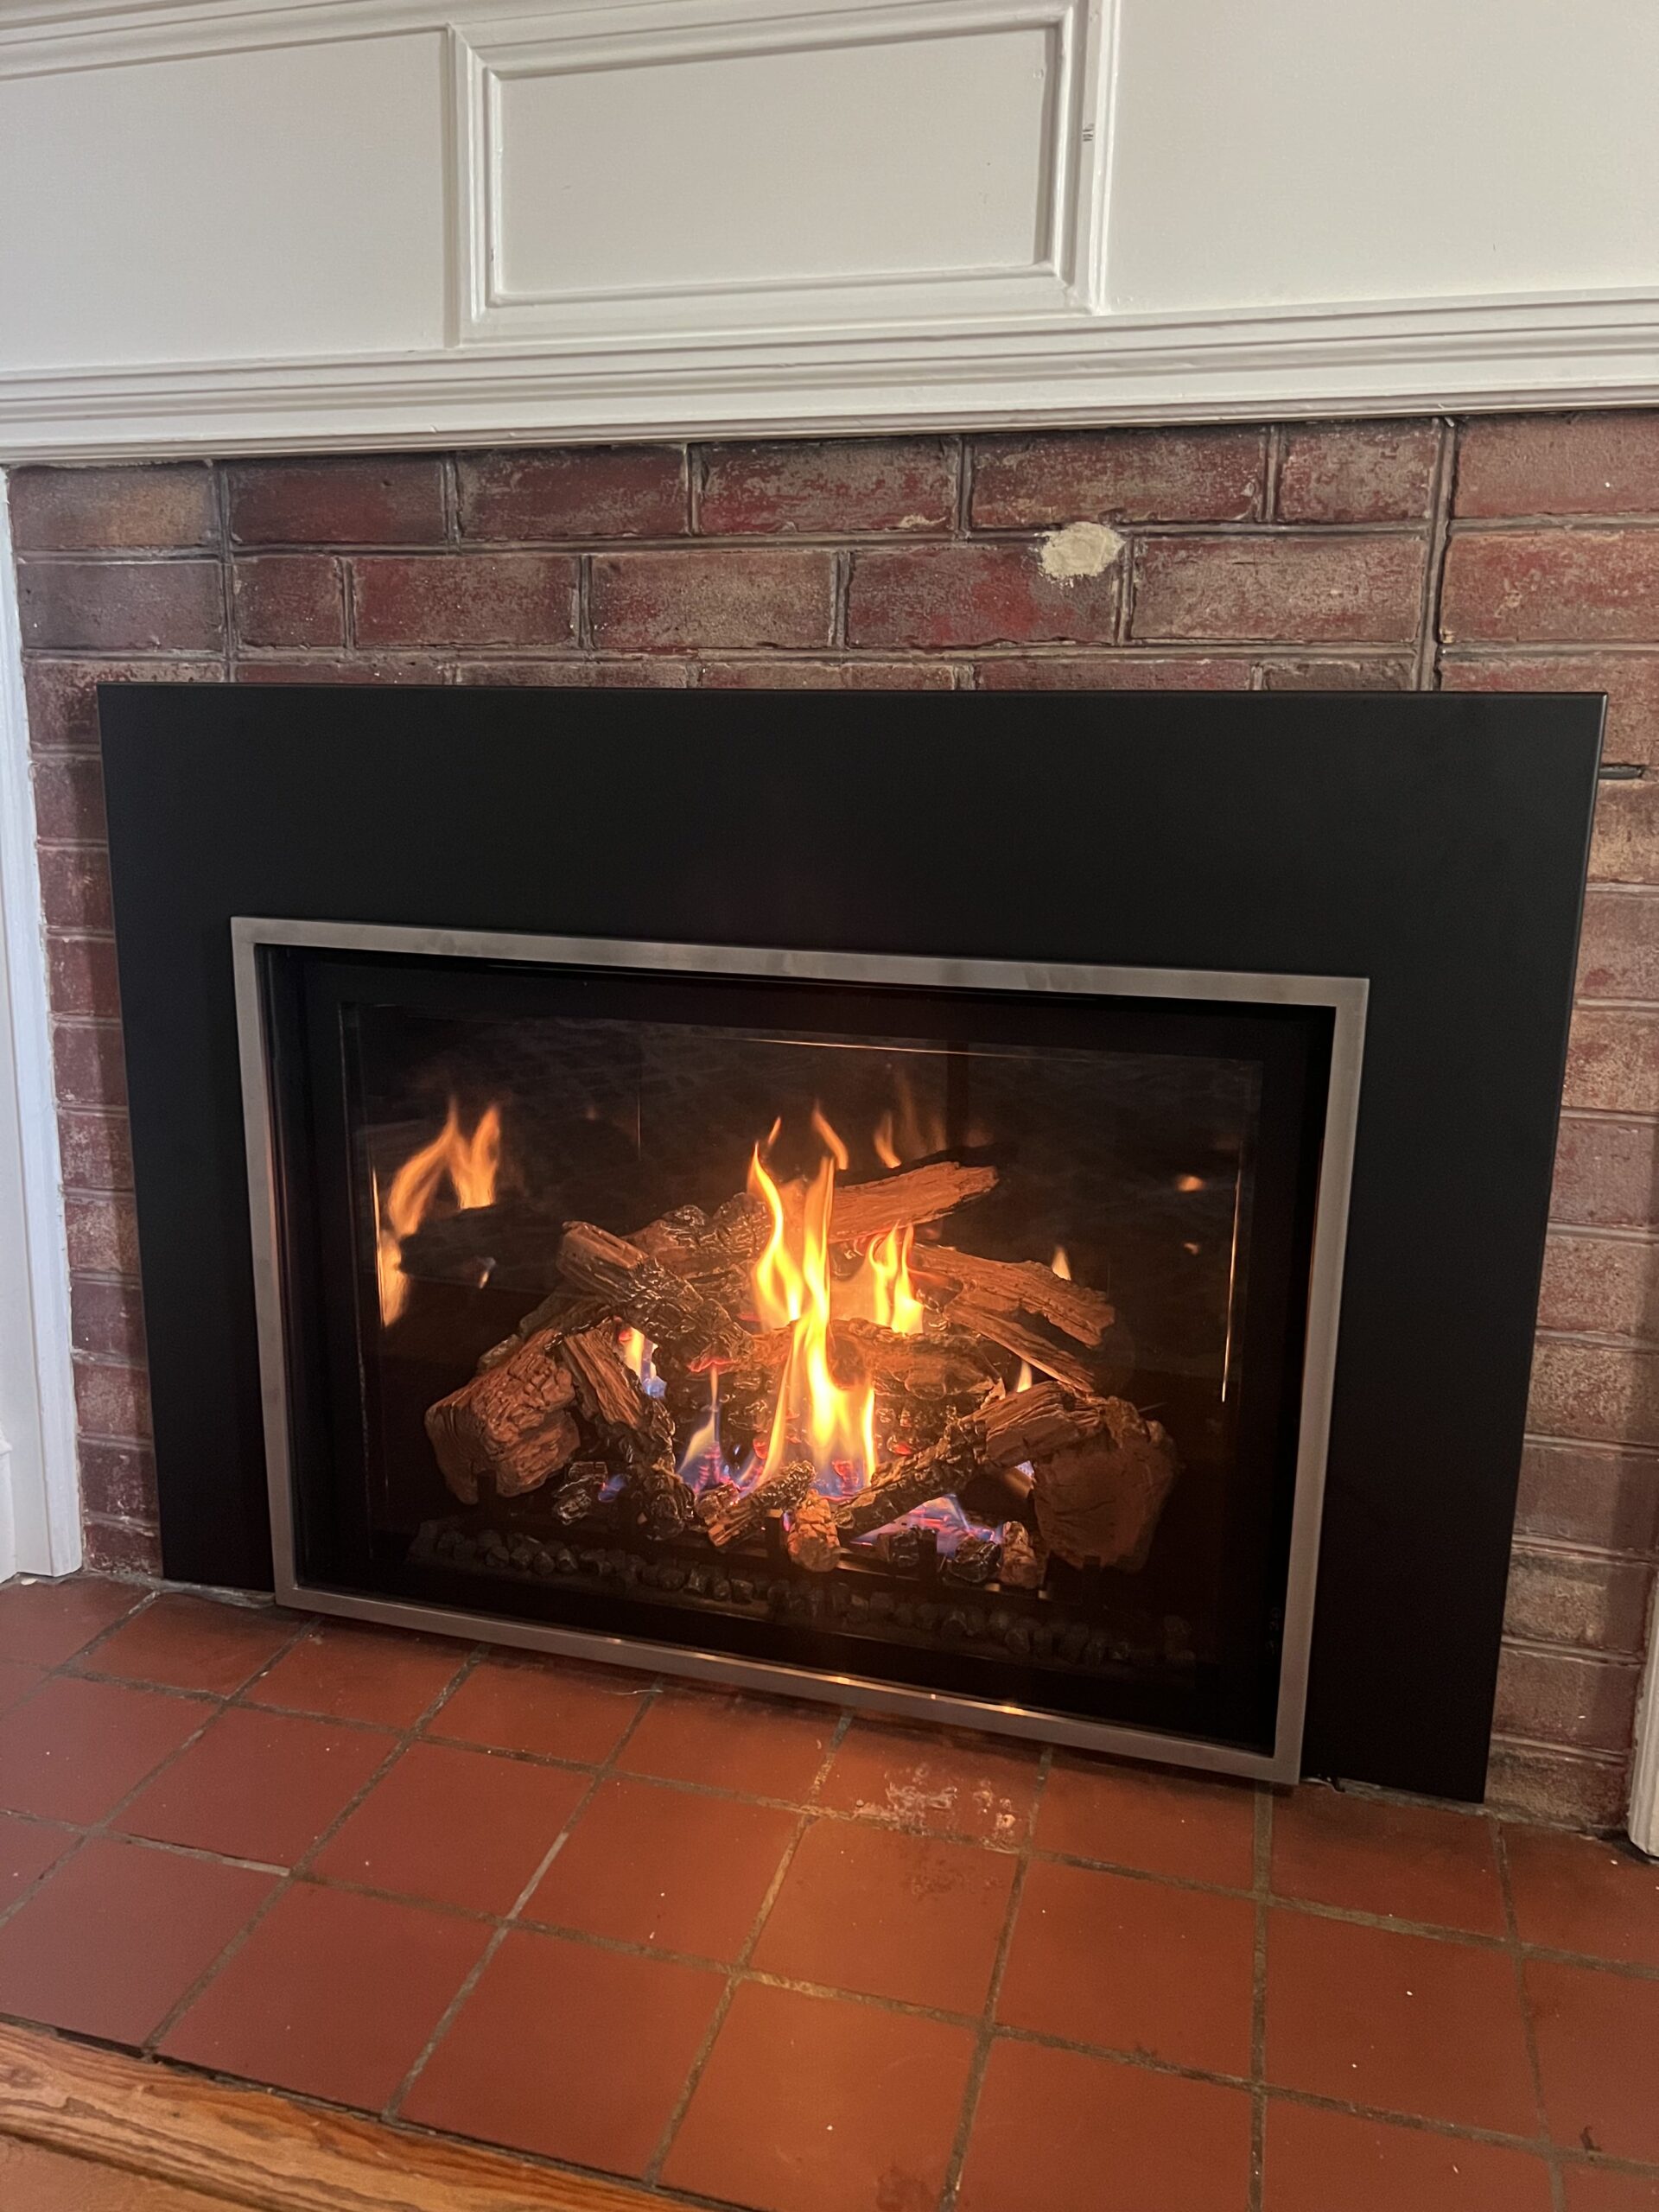 gas fireplace insert in a brick fireplace with a white mantel